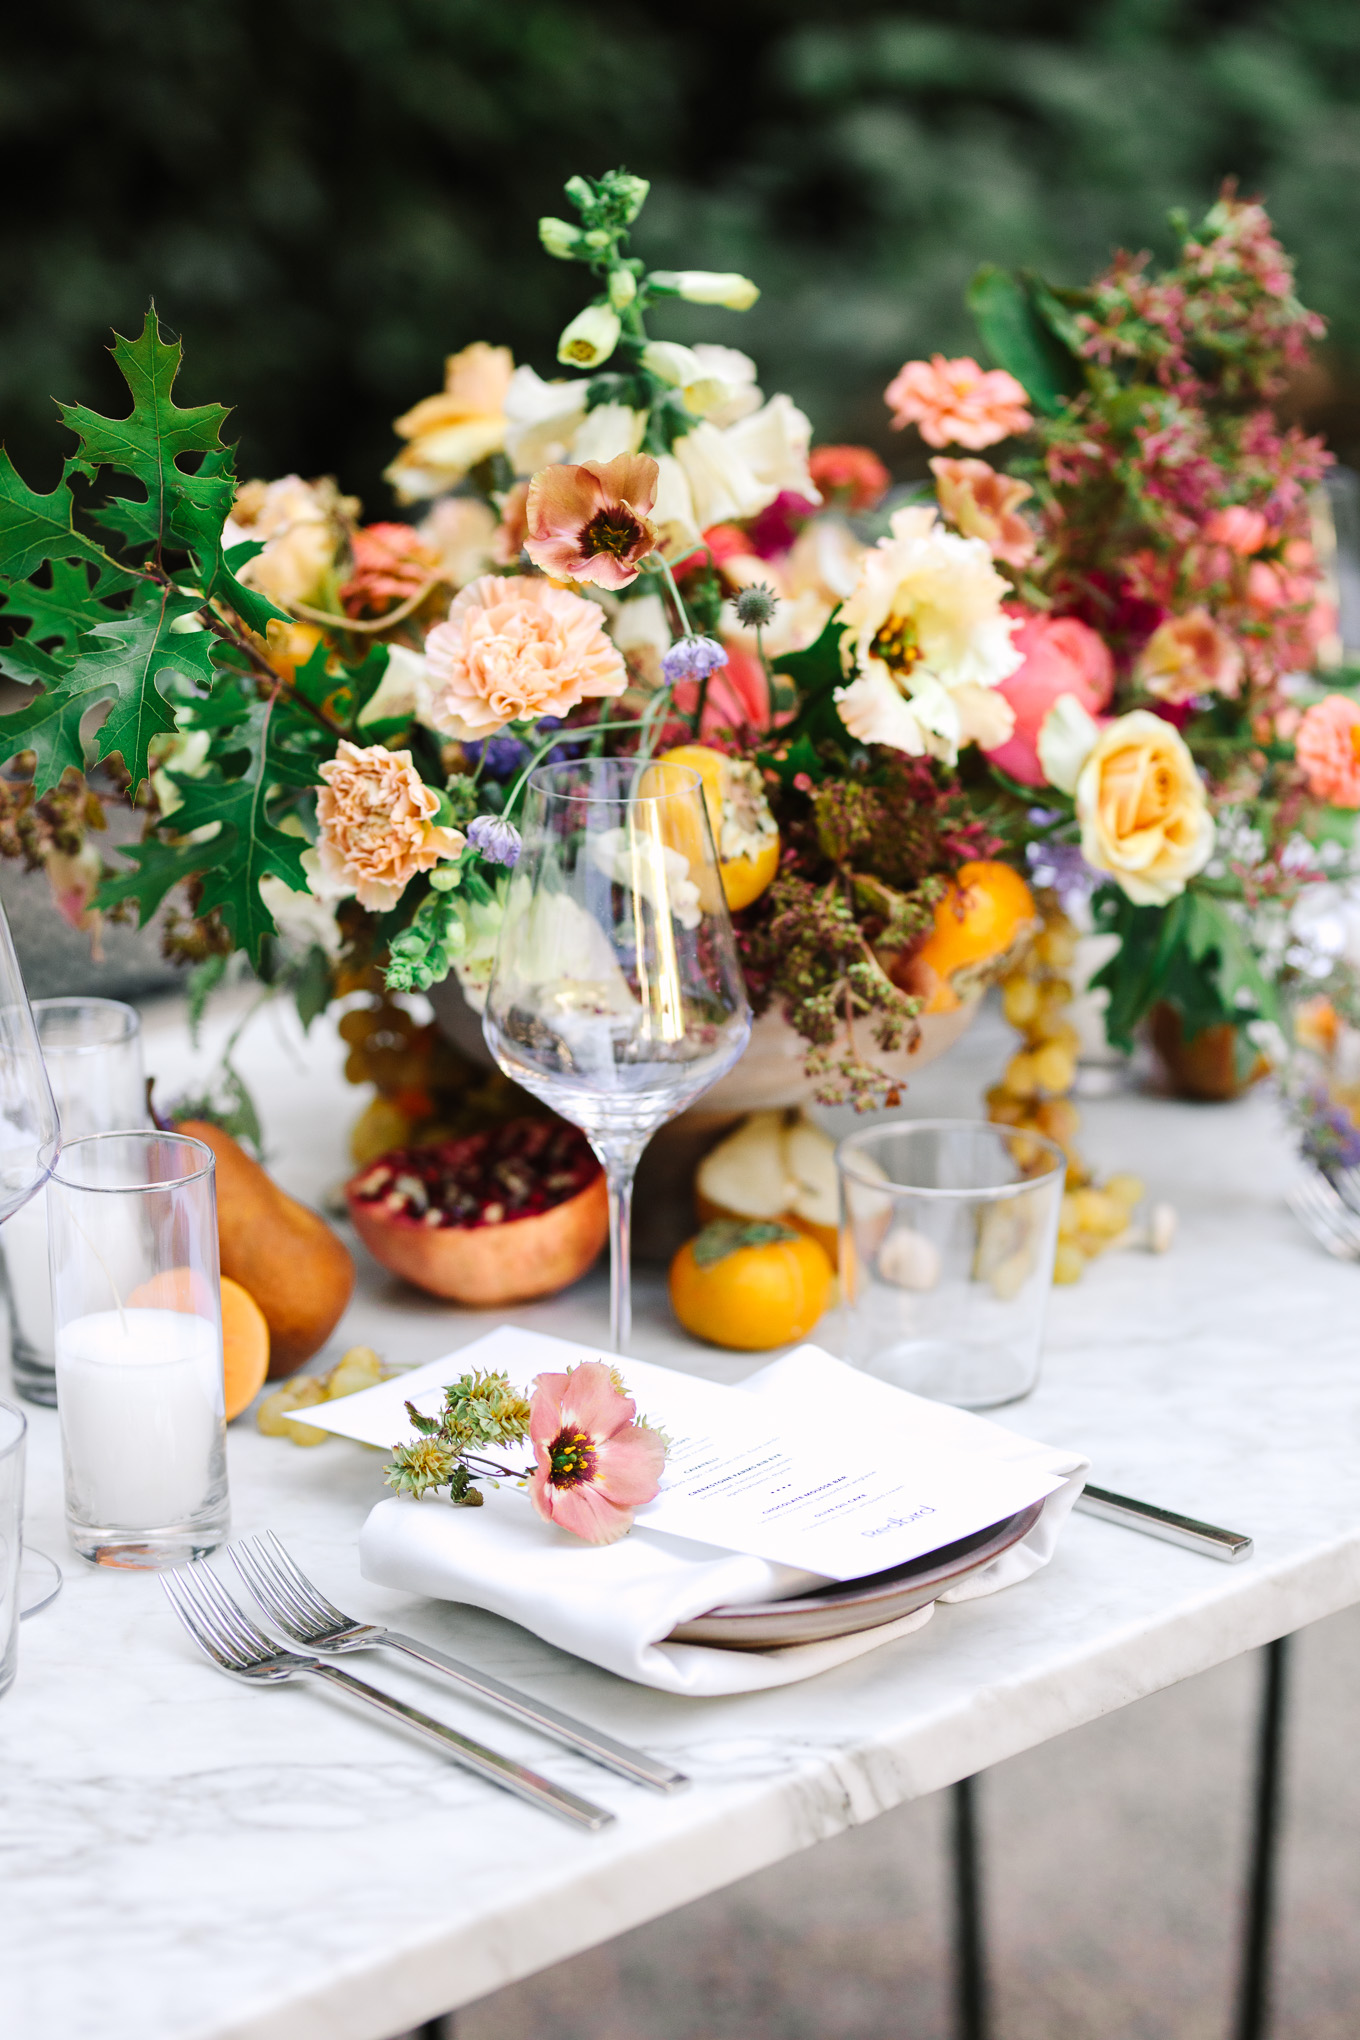 Table decor at Redbird garden wedding | Best Southern California Garden Wedding Venues | Colorful and elevated wedding photography for fun-loving couples | #gardenvenue #weddingvenue #socalweddingvenue #bouquetideas #uniquebouquet   Source: Mary Costa Photography | Los Angeles 